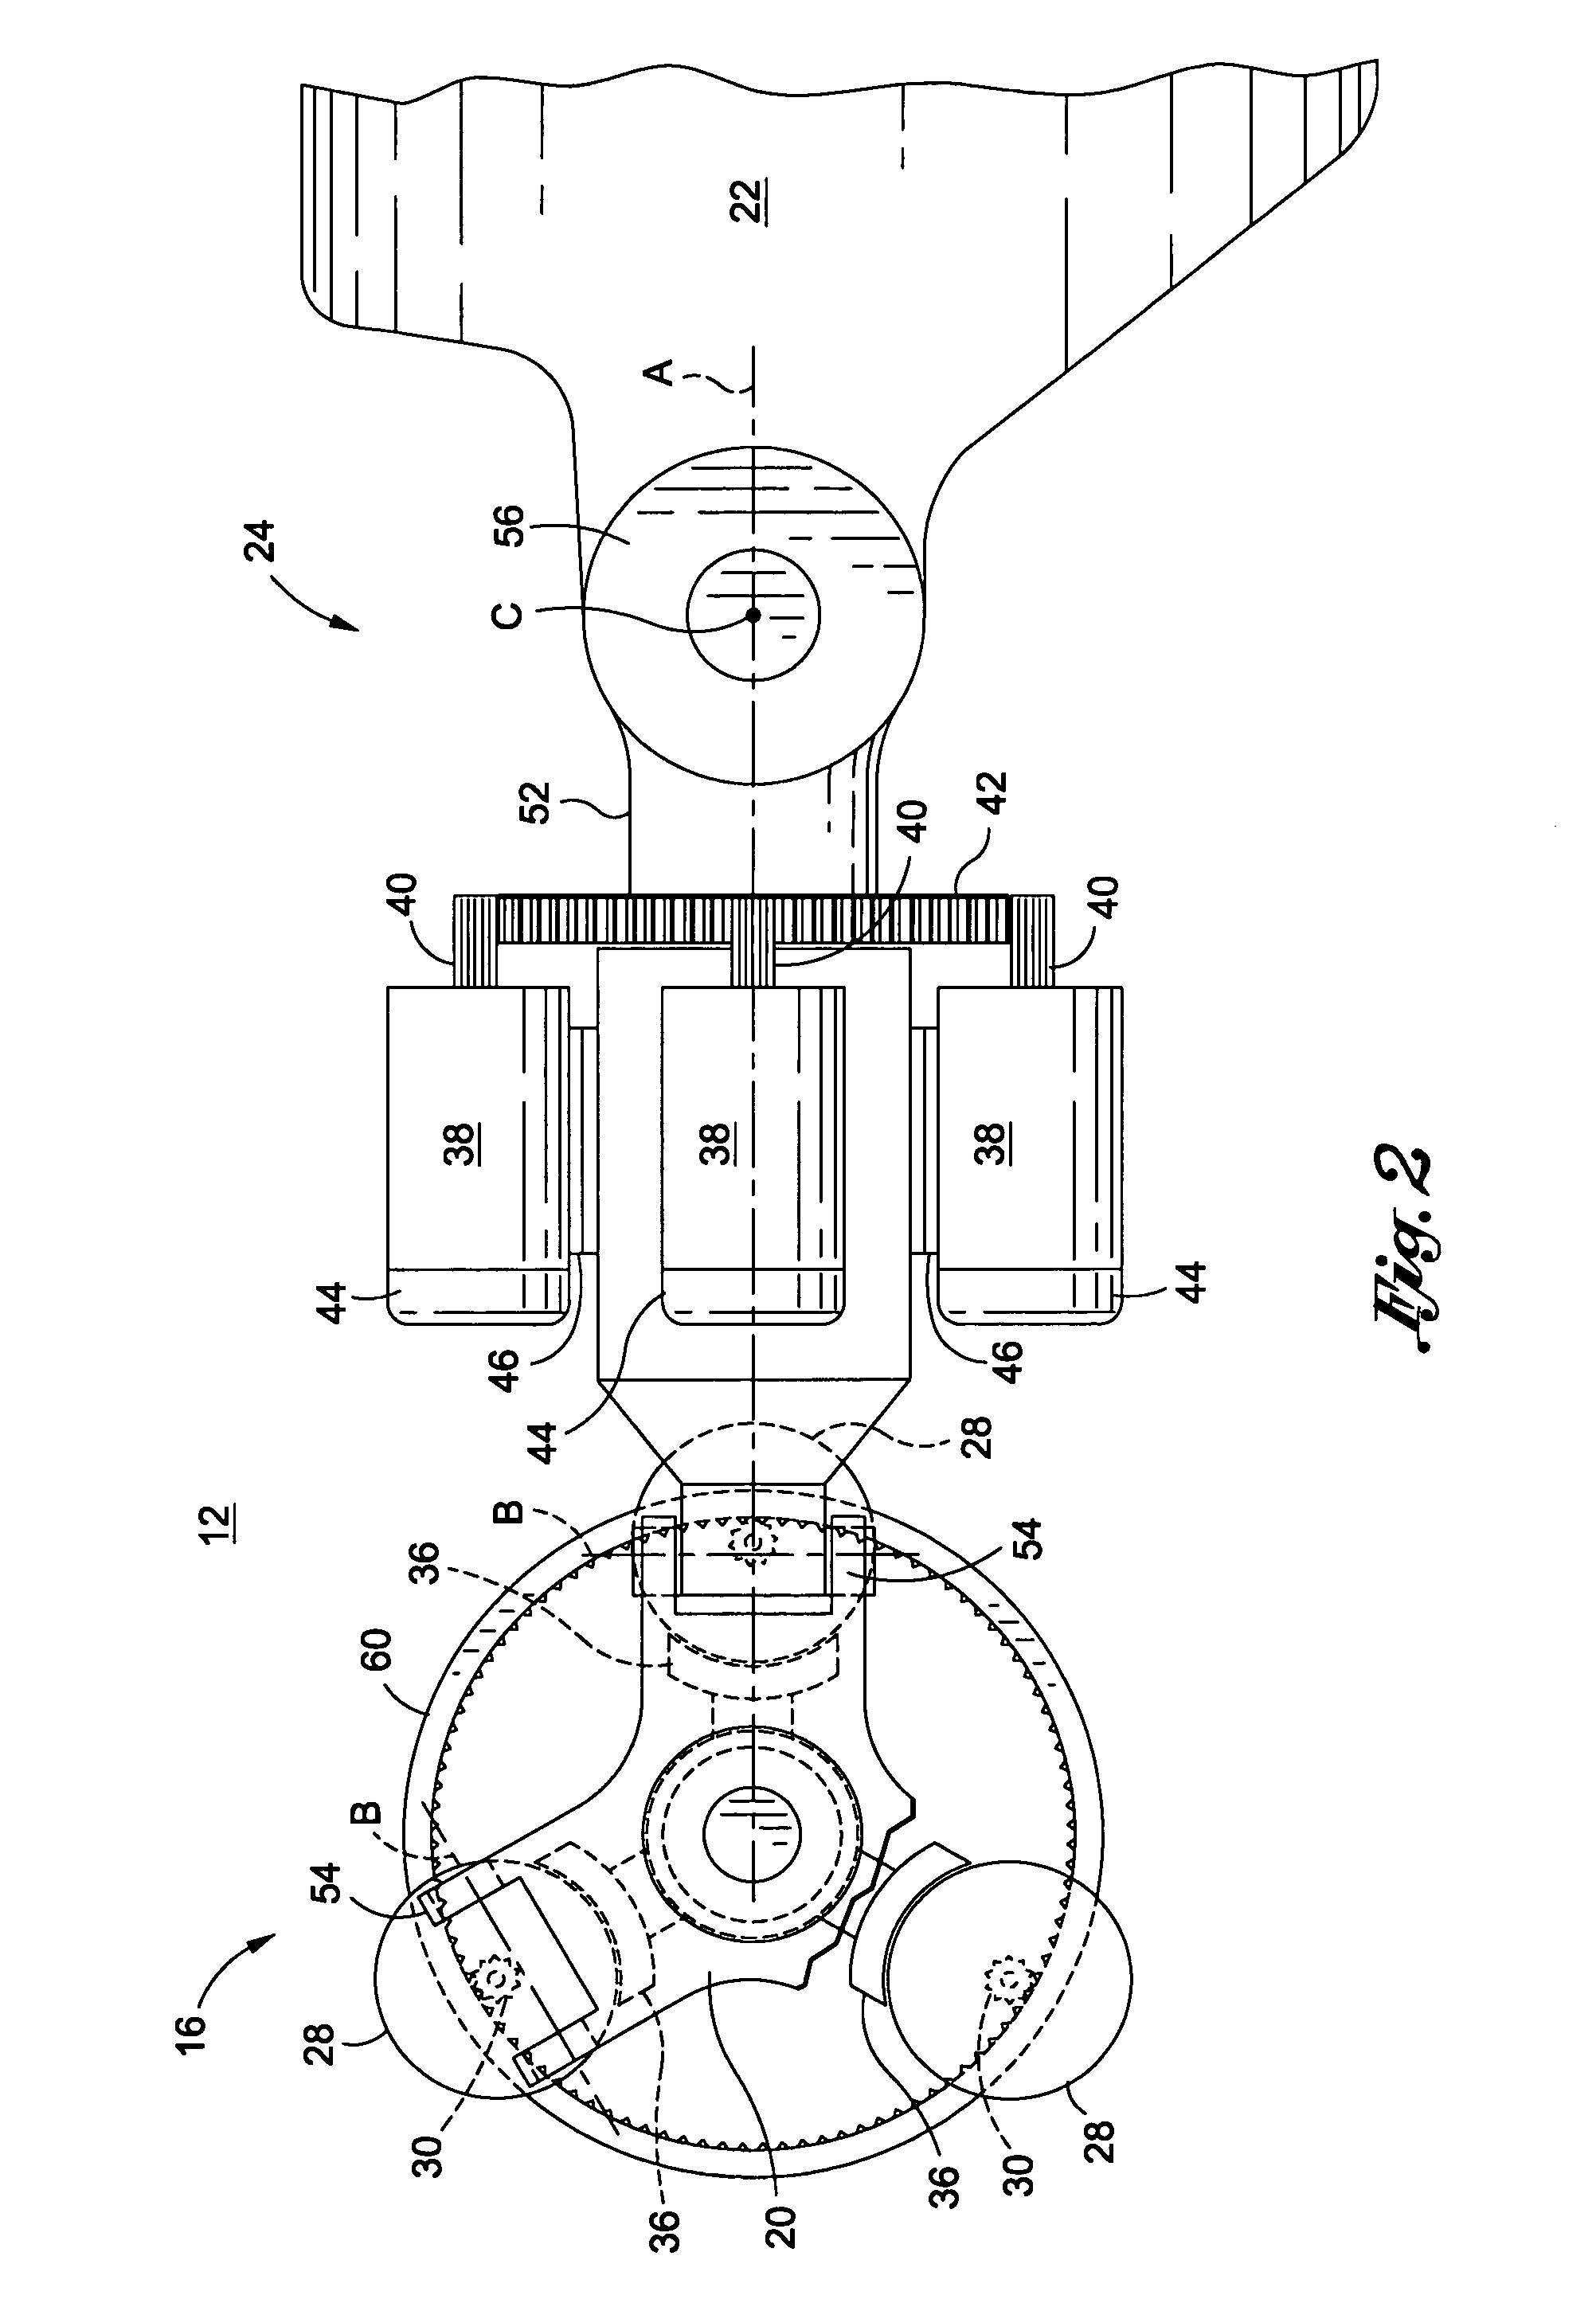 Swashplateless helicopter blade actuation system